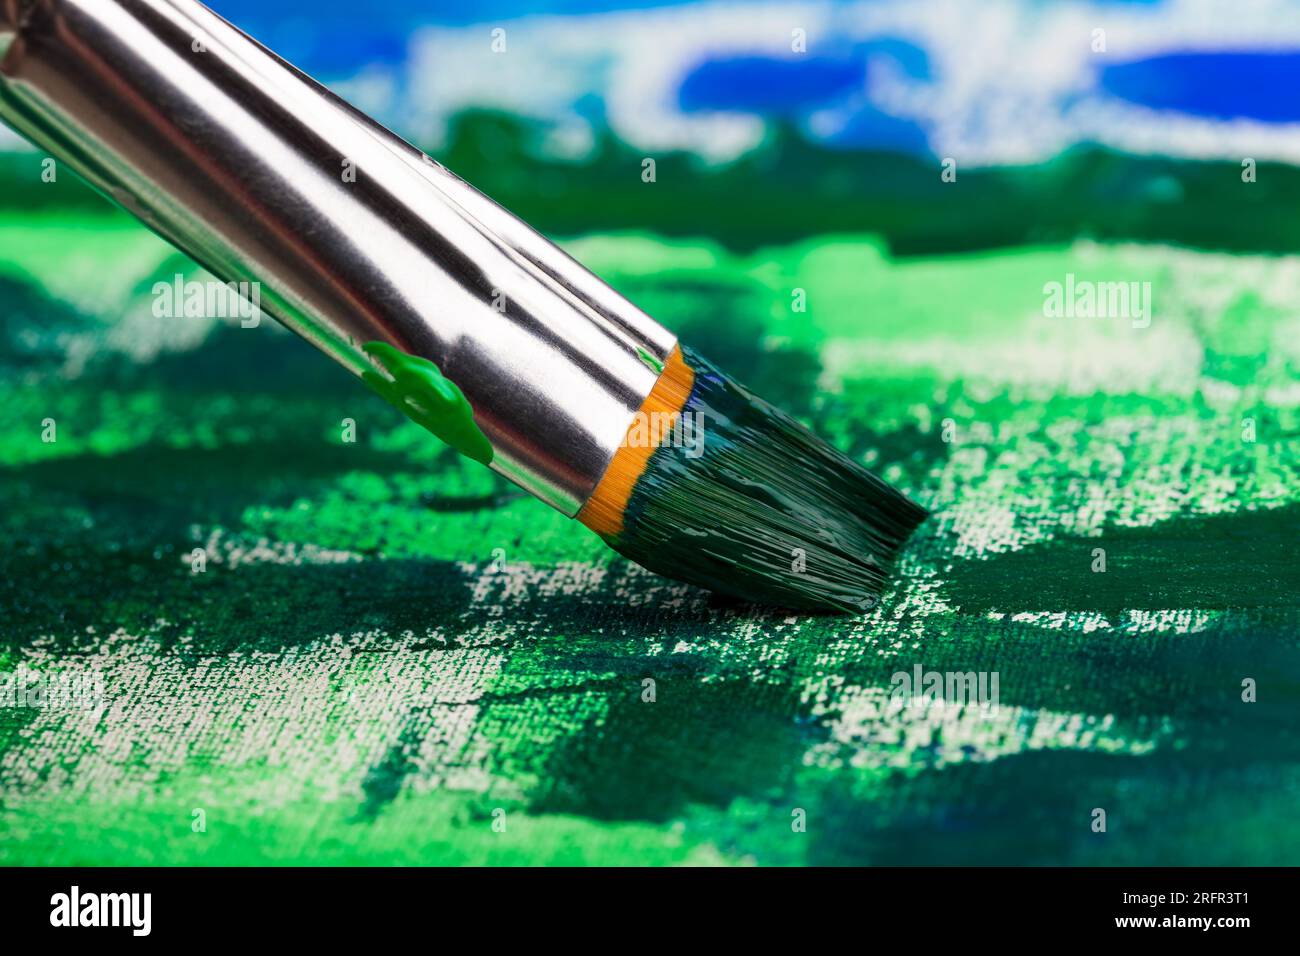 oil and other paints with brushes for creativity, the creative process of  drawing by mixing different colors of paints with art brushes, art brushes  a Stock Photo - Alamy